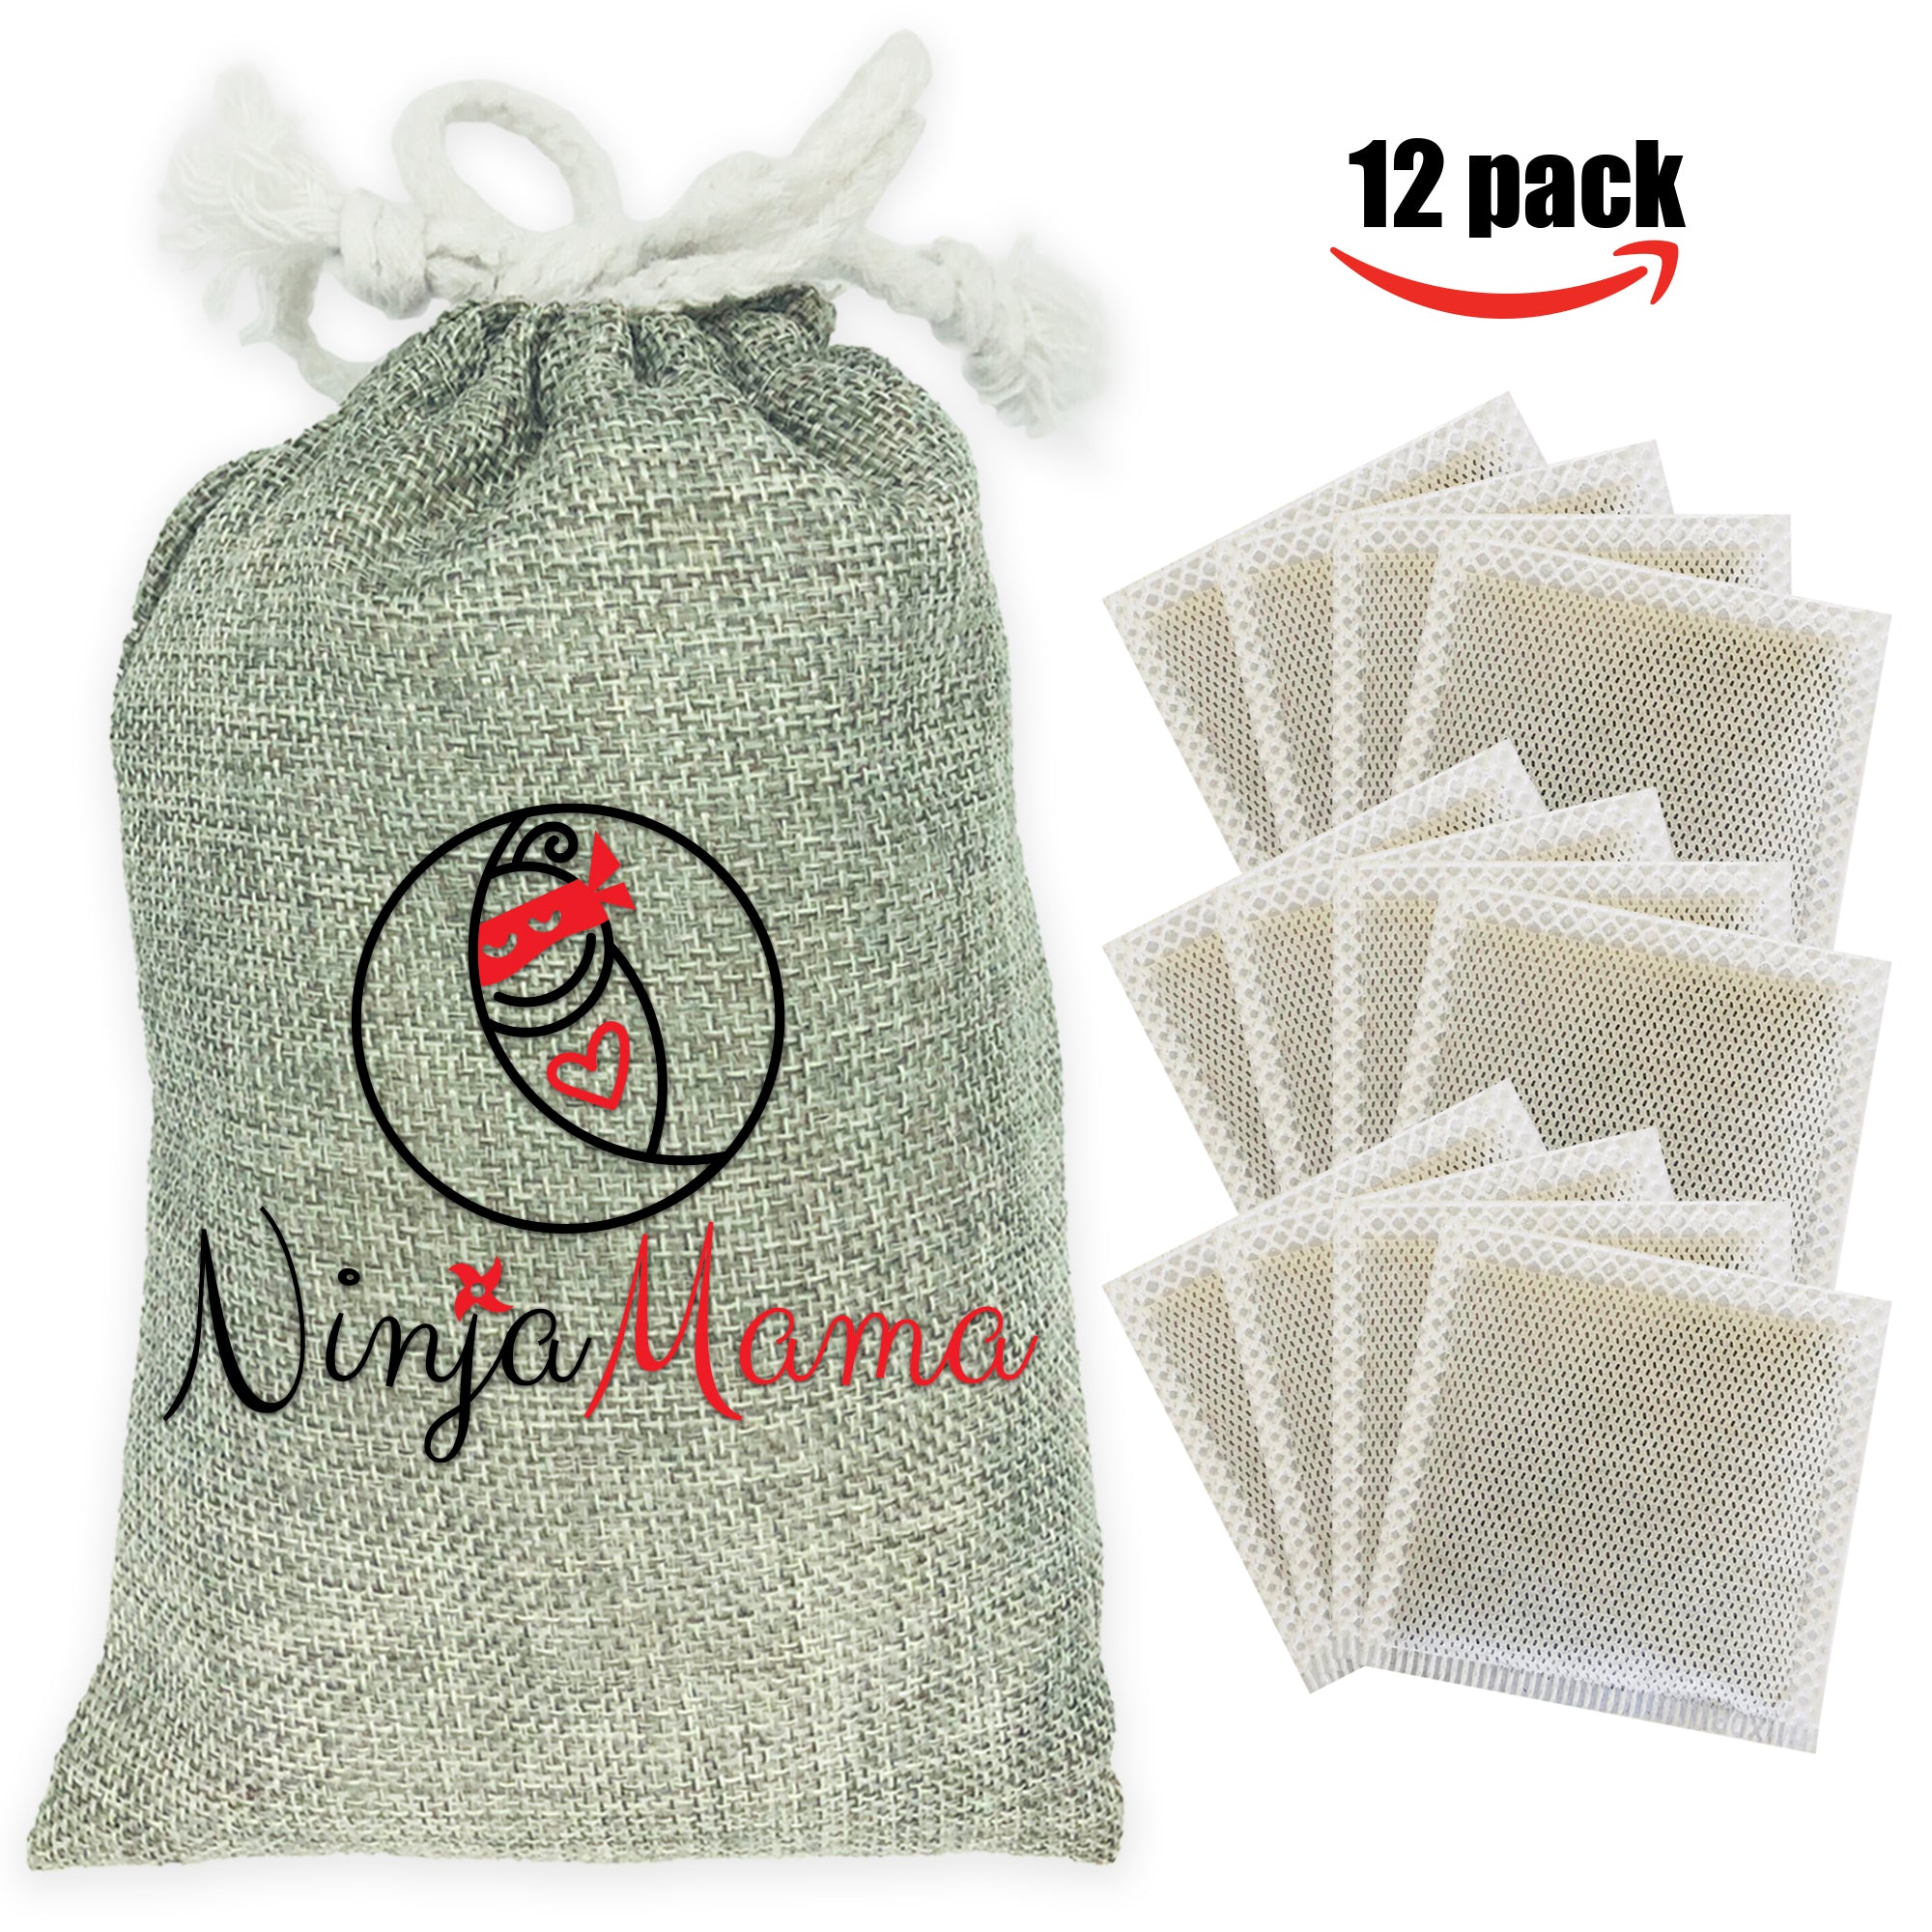  Ninja Mama Disposable Postpartum Underwear (Without Pad) with  Storage Pouch. Washable Mesh Panties for Women (5 Count). Labour and Delivery  Maternity Surgical C Section Hospital Bag - One Size : Health